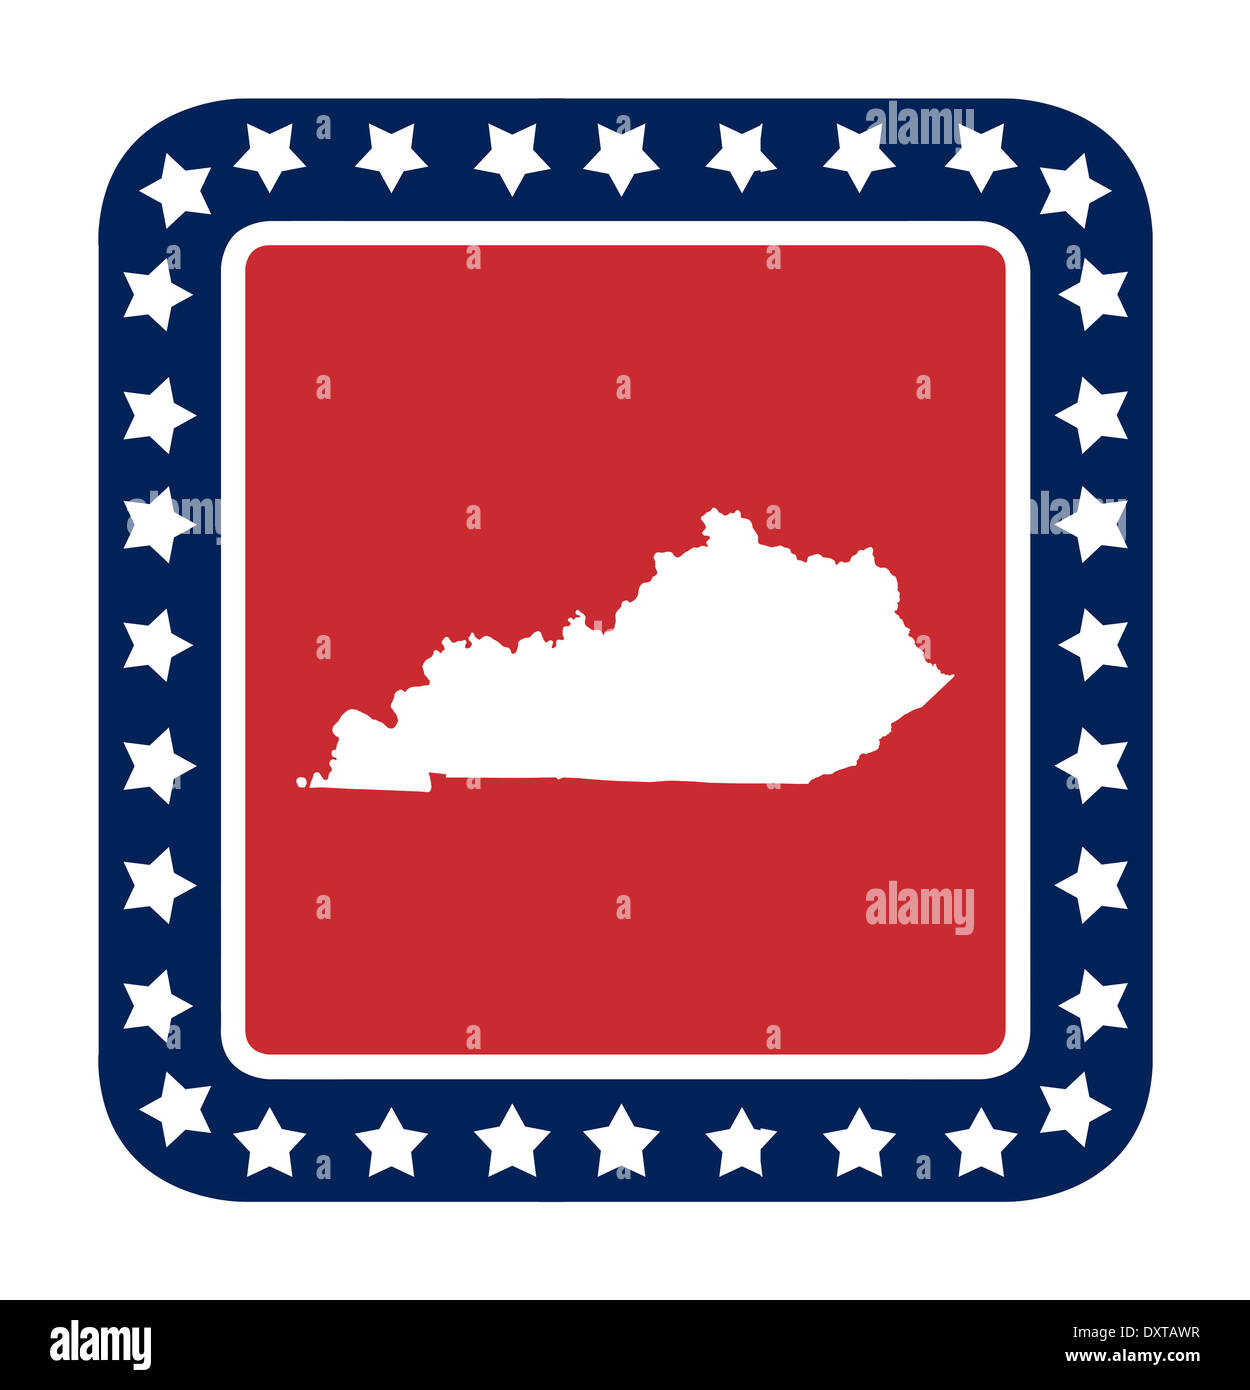 Kentucky state button on American flag in flat web design style, isolated on white background. Stock Photo